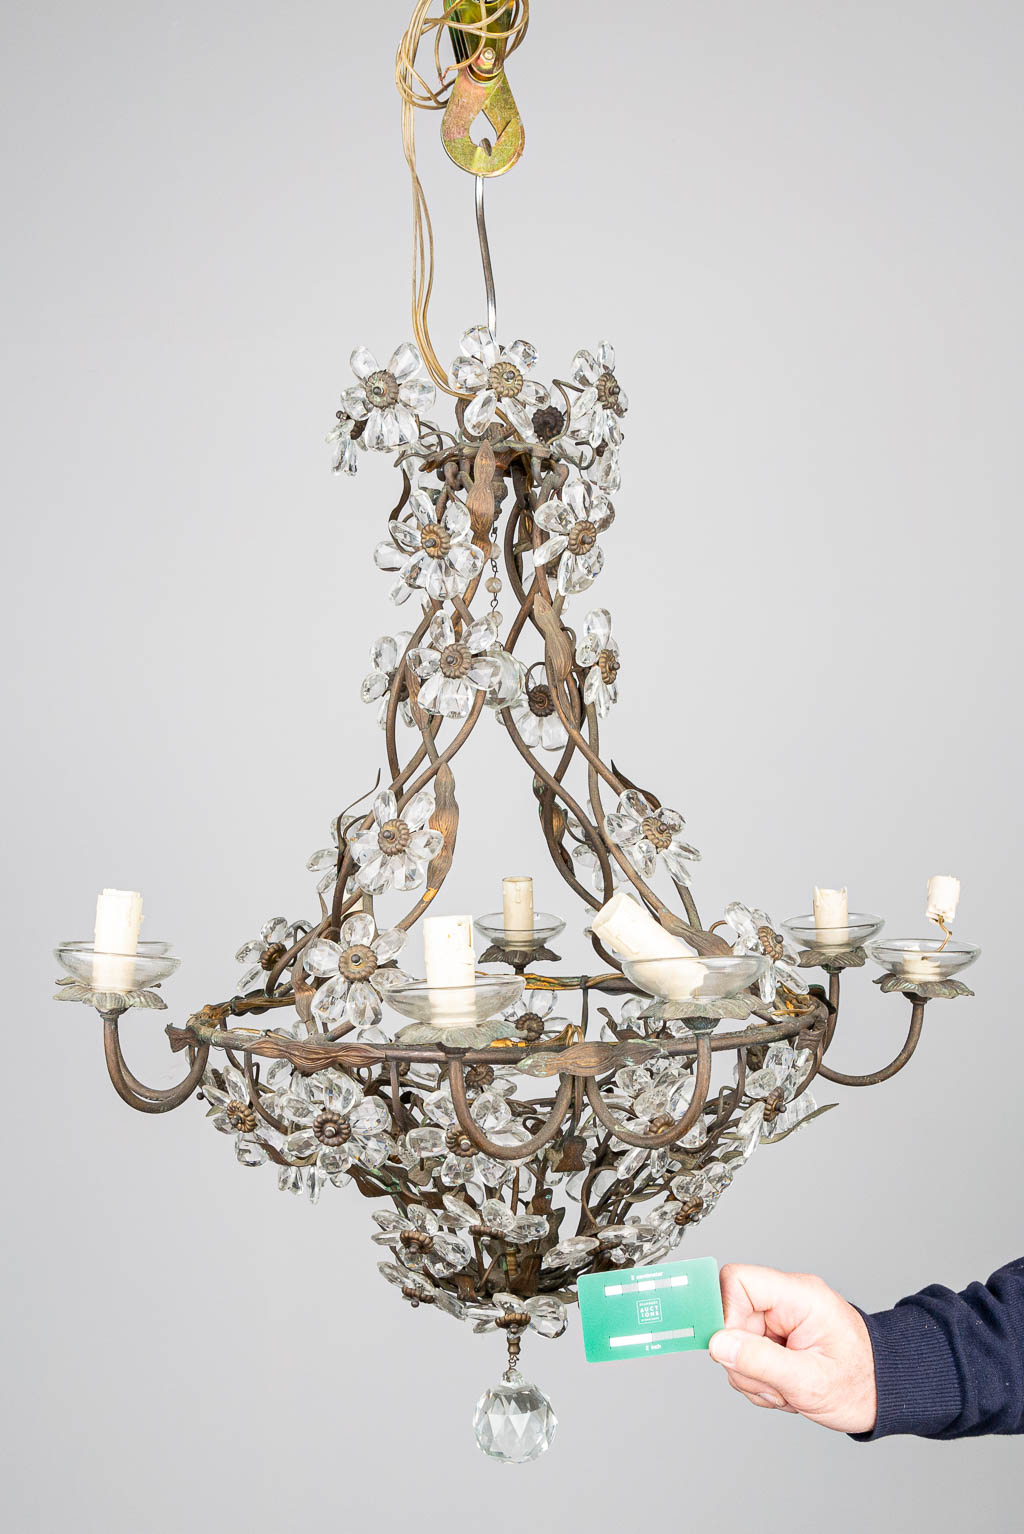 A large chandelier made of metal with glass flowers. 